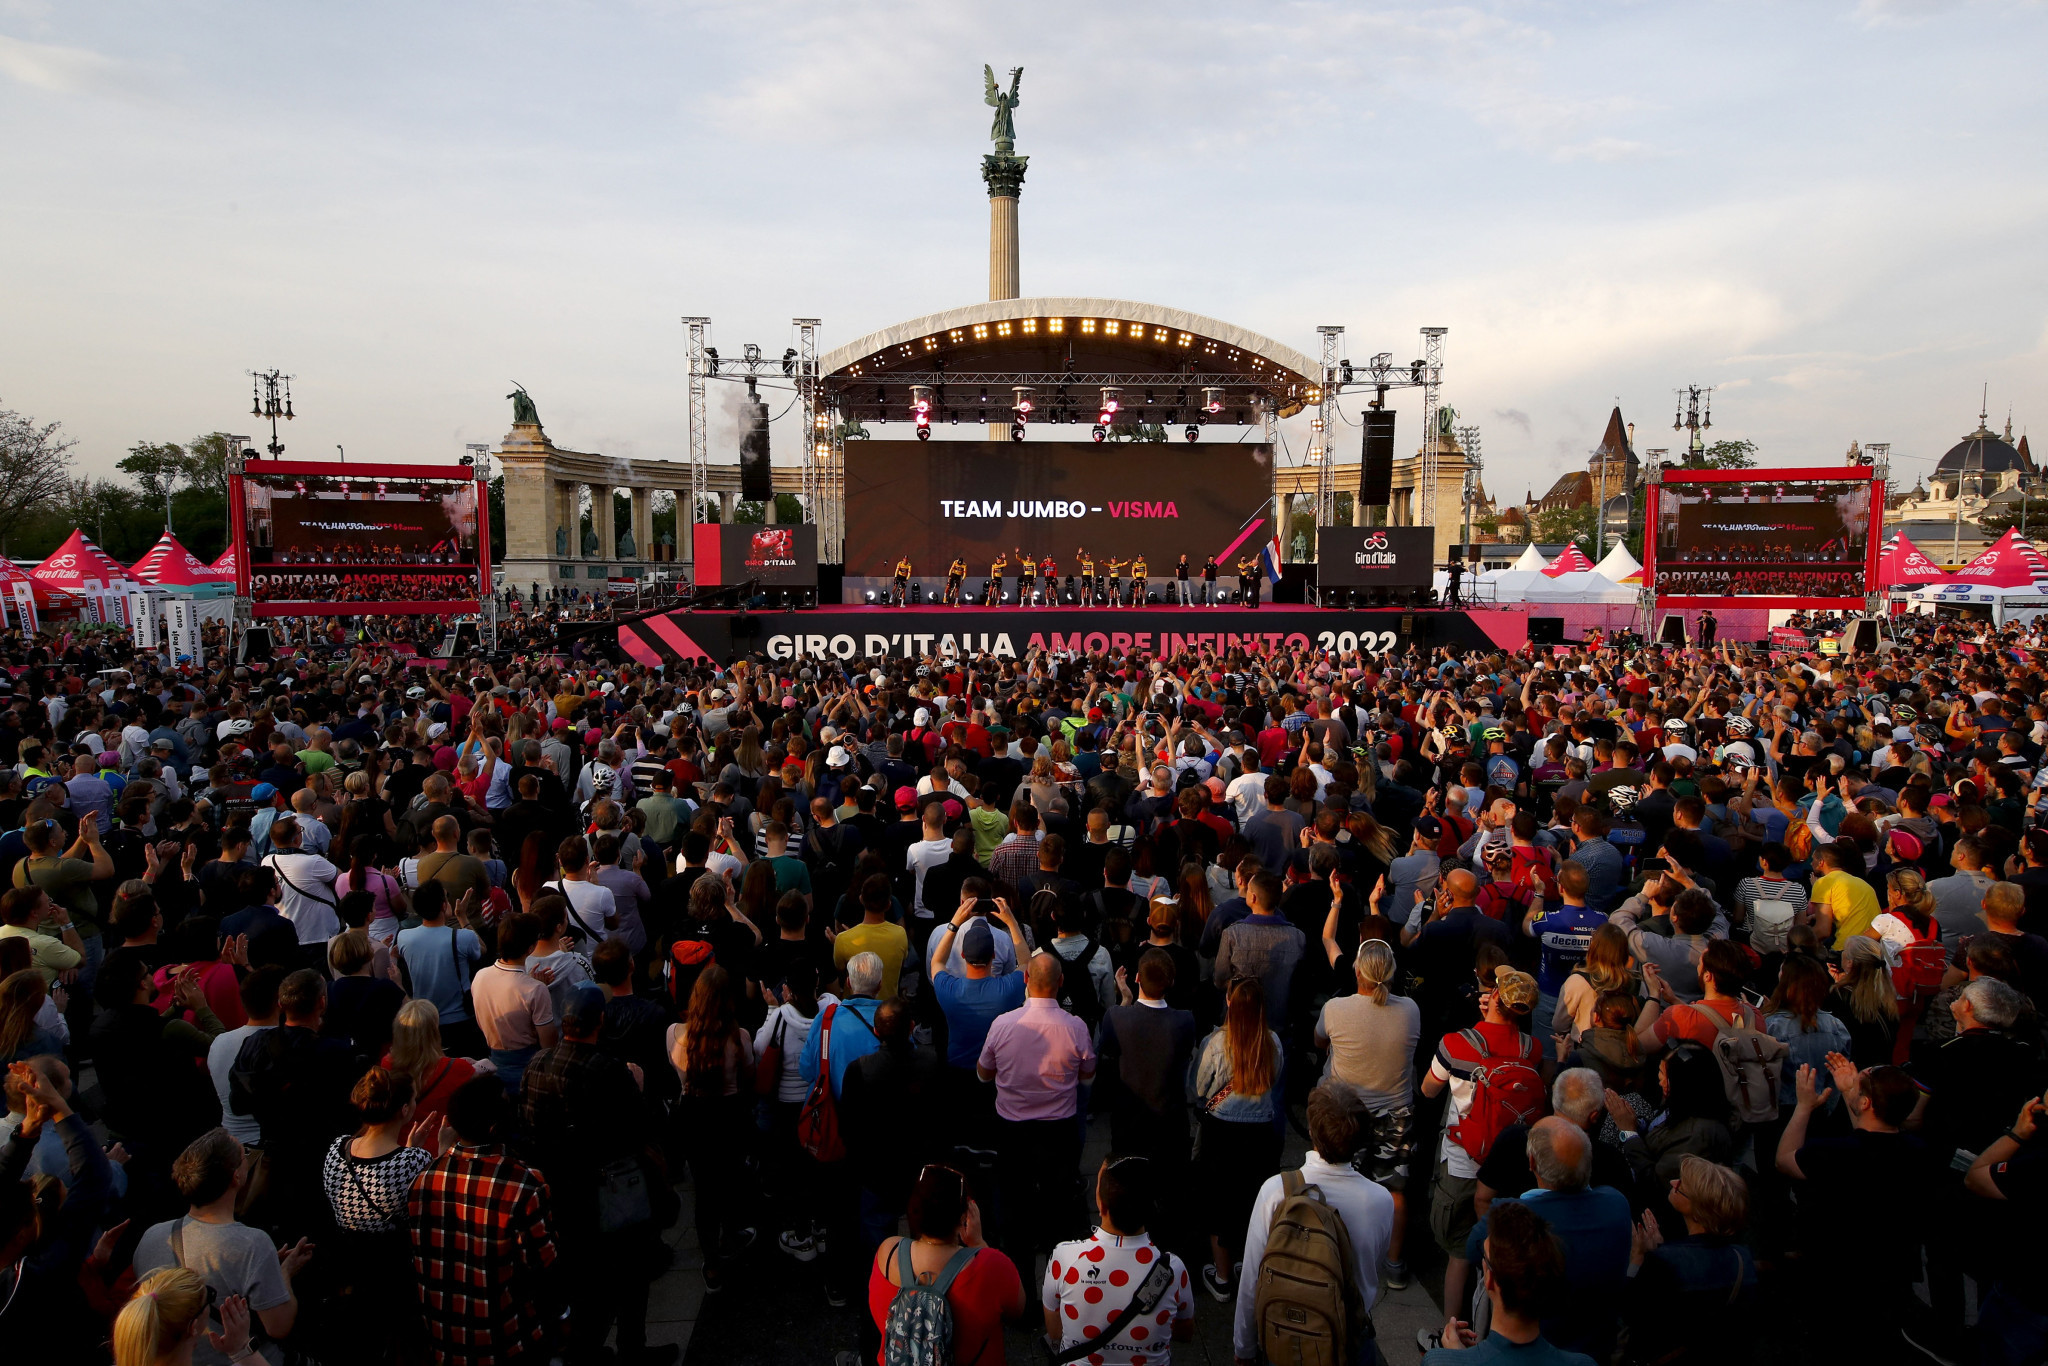 Budapest will host the first stage of the Giro d'Italia ©Getty Images